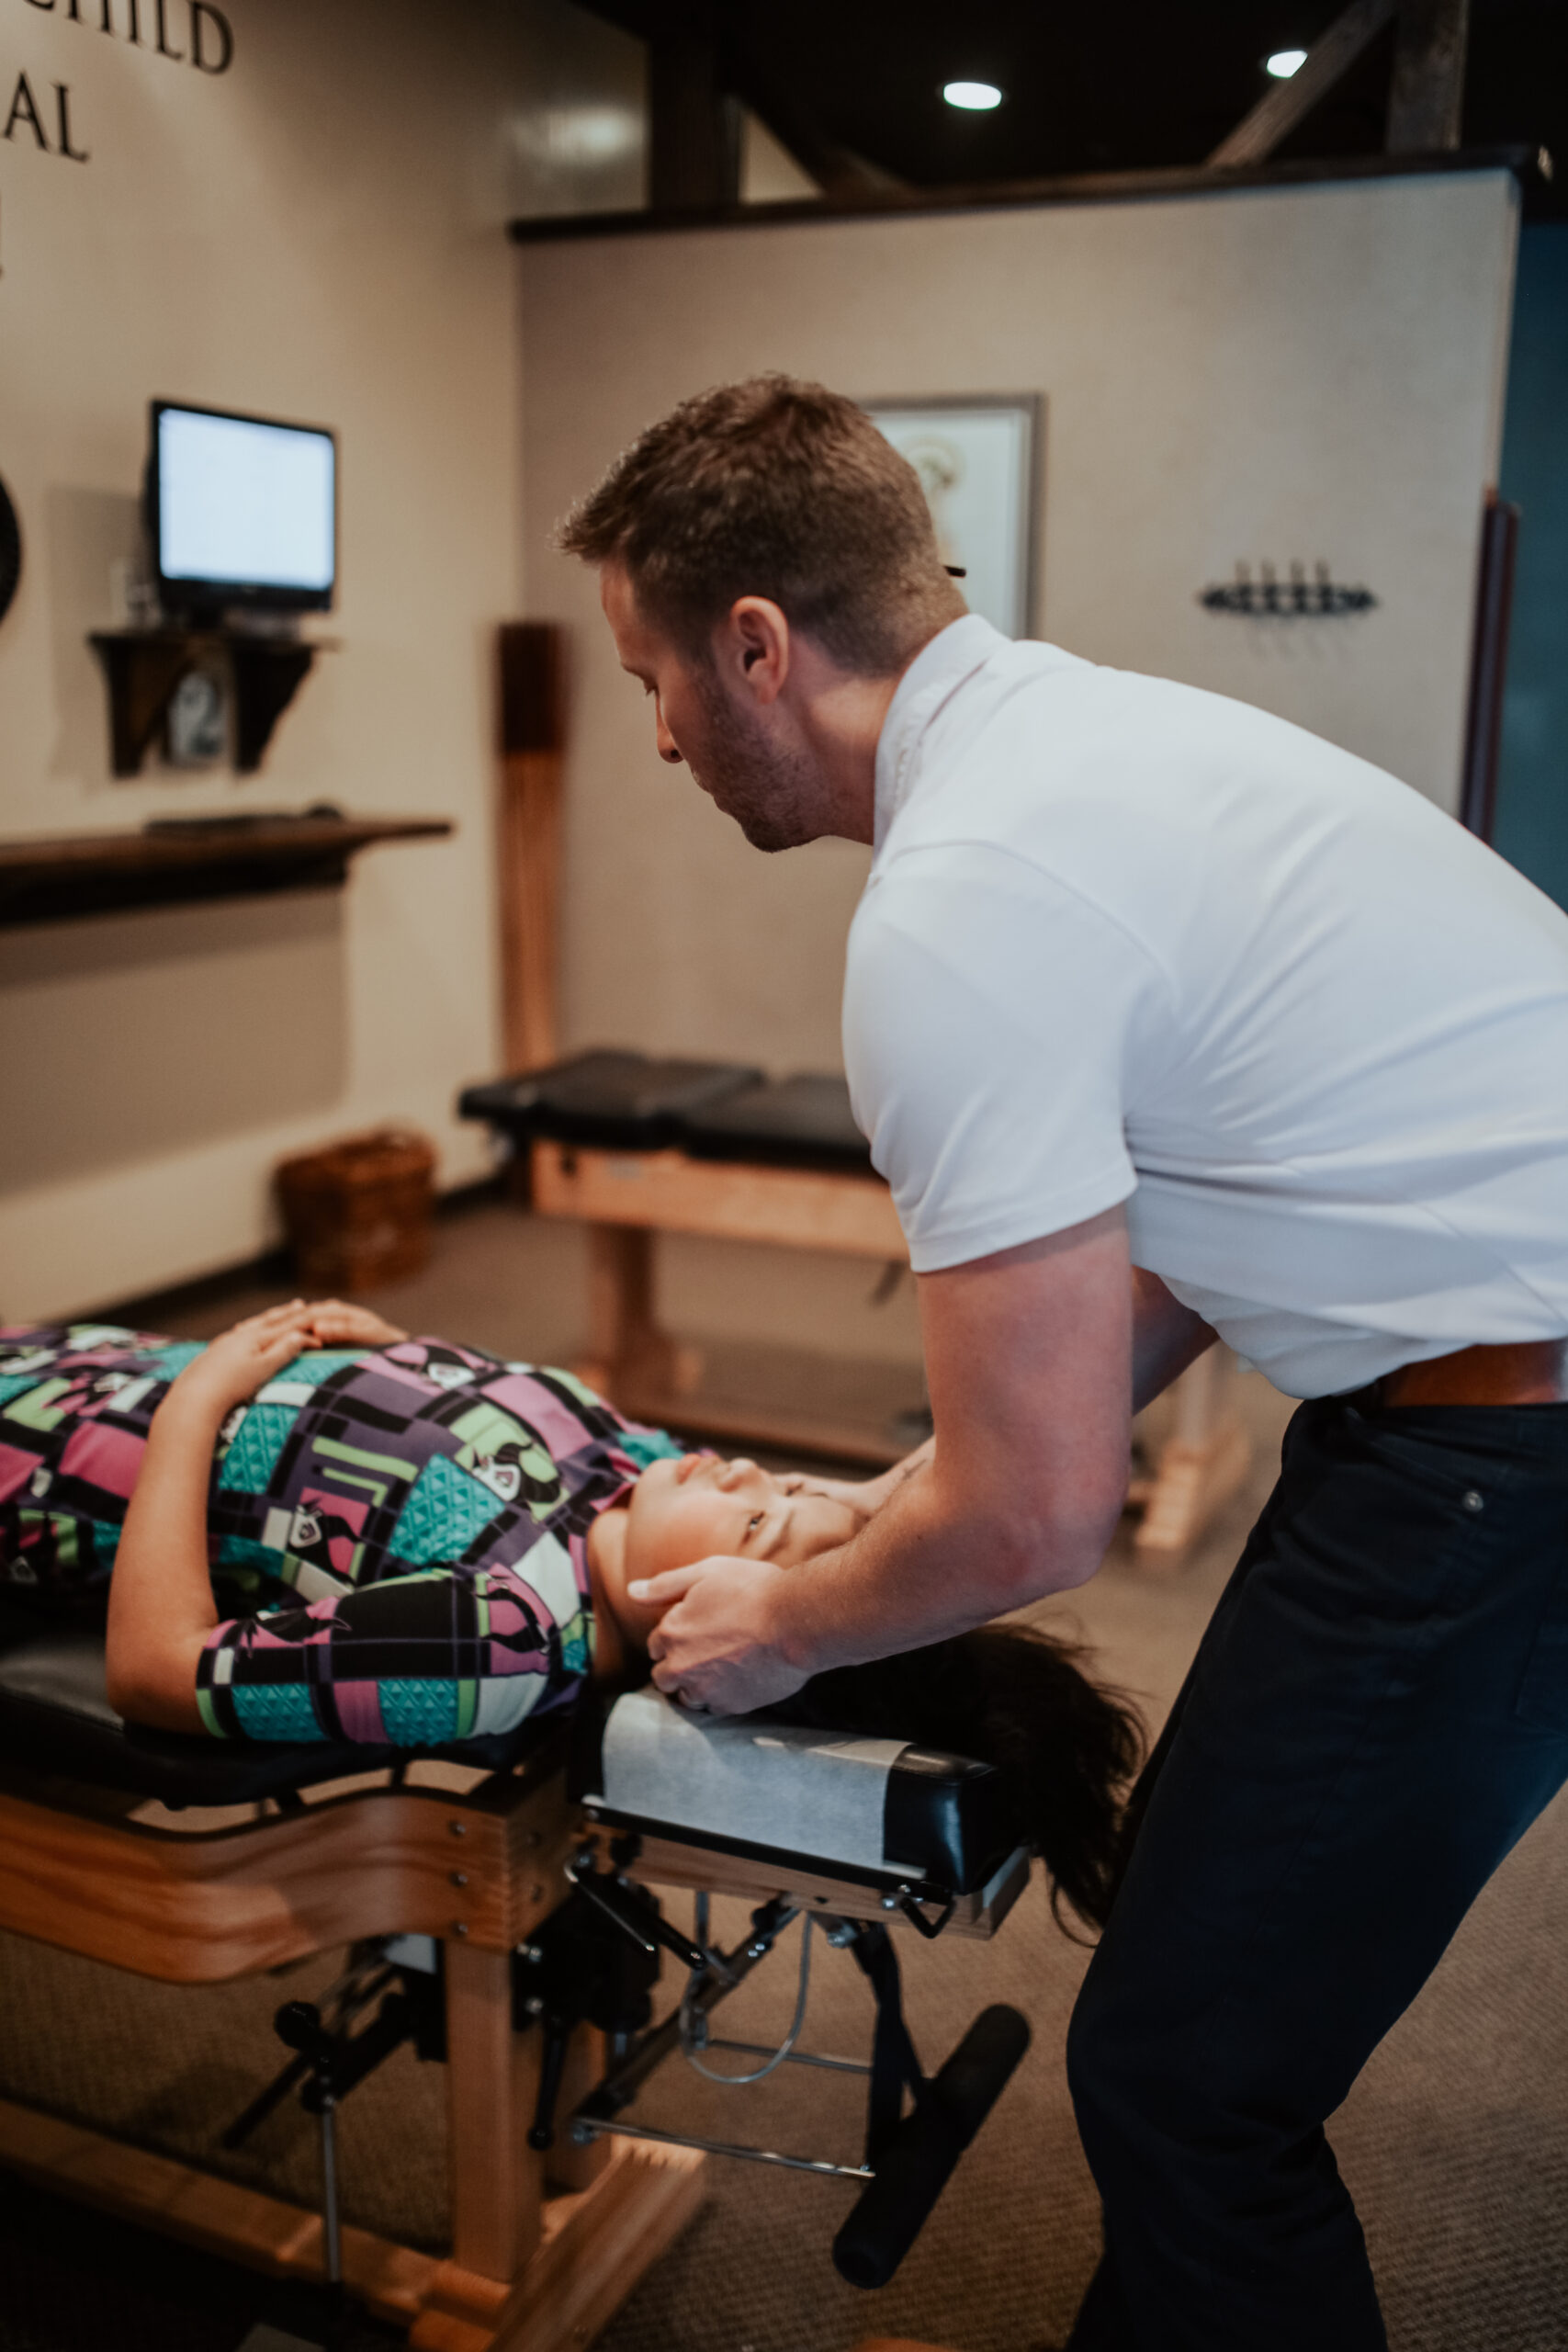 Chiropractor Treating A Patient On The Table